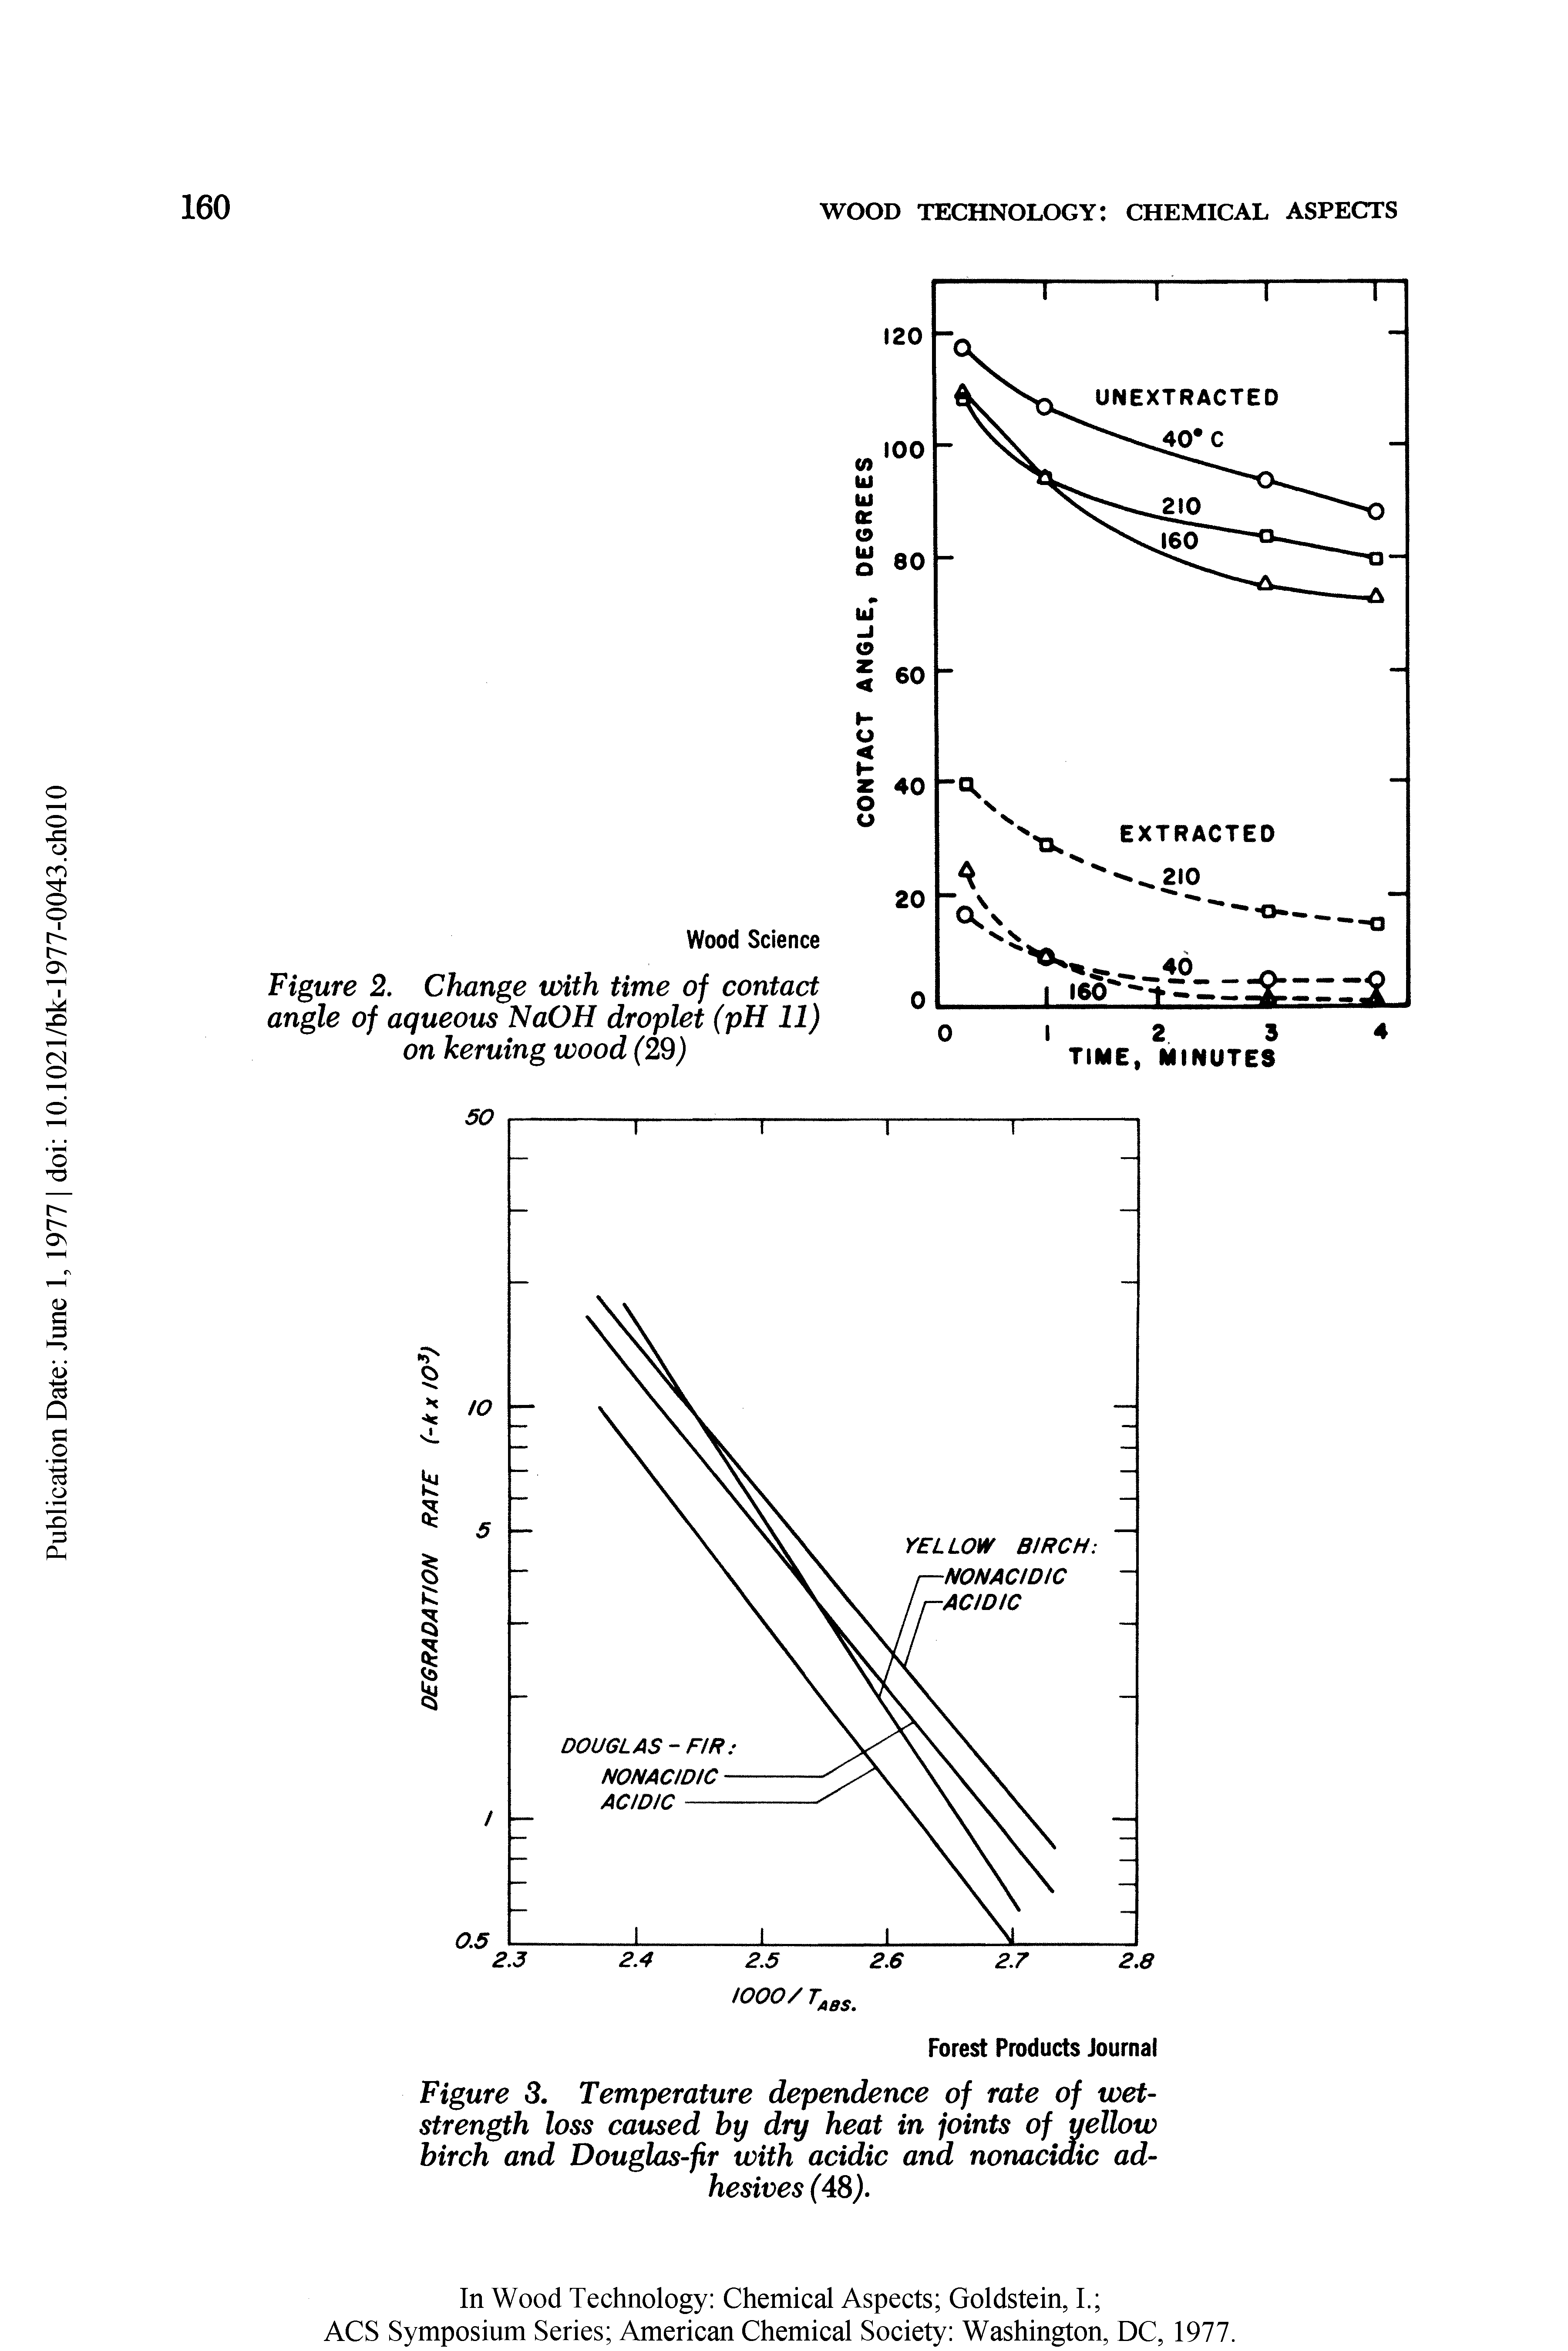 Figure 3. Temperature dependence of rate of wet-strength loss caused by dry heat in joints of yellow birch and Douglas-fir with acidic and nonacidic adhesives (48).